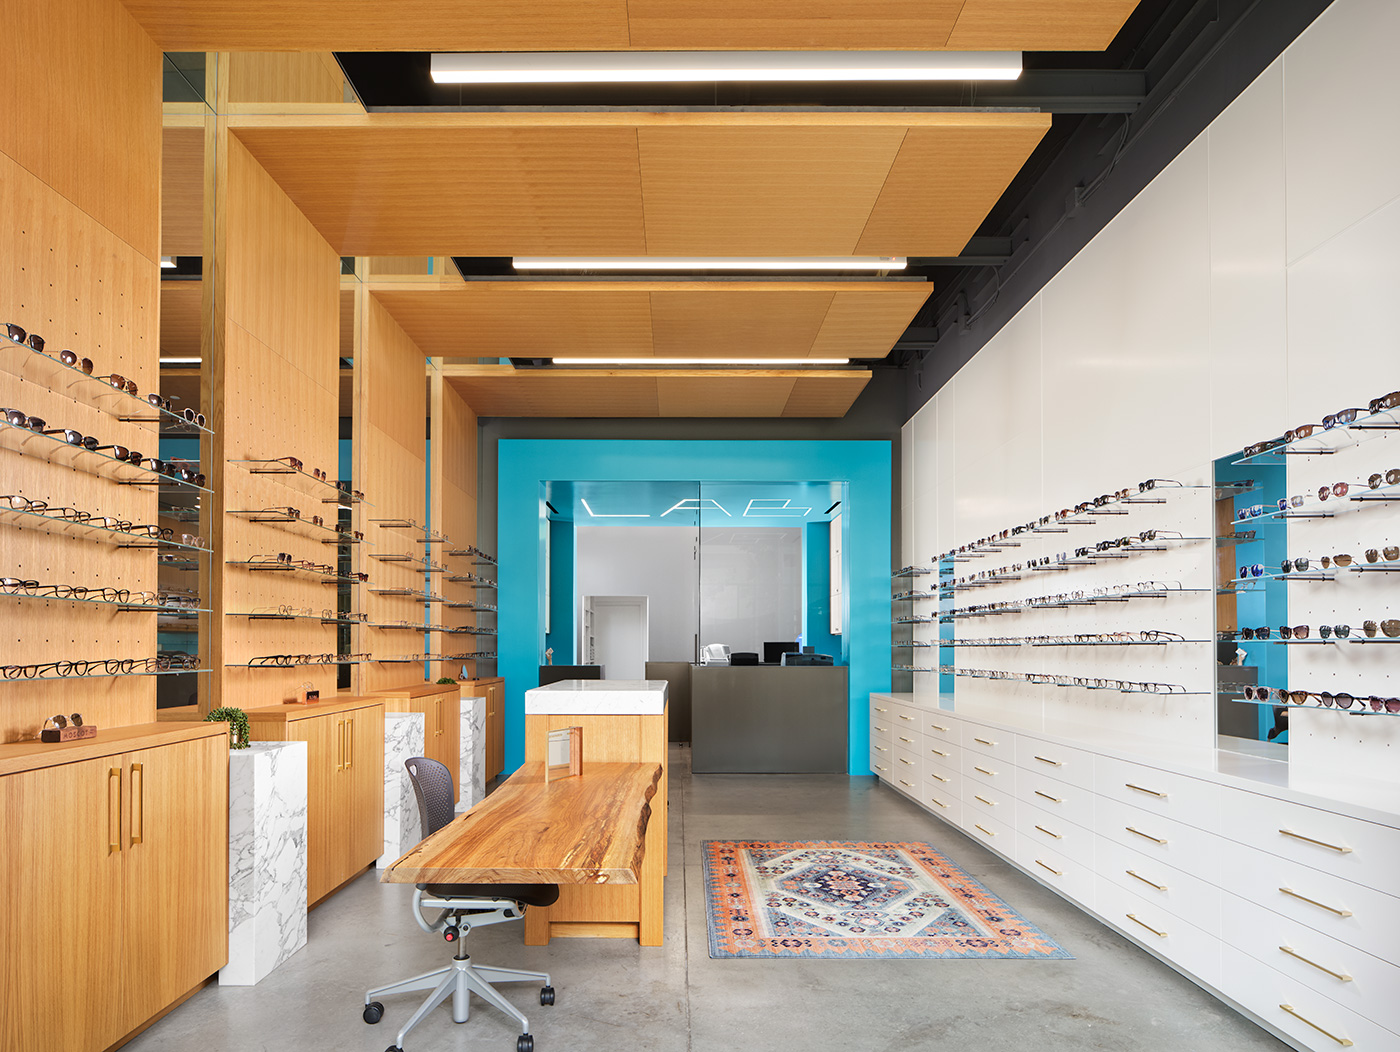 The interior of a small eyewear store.